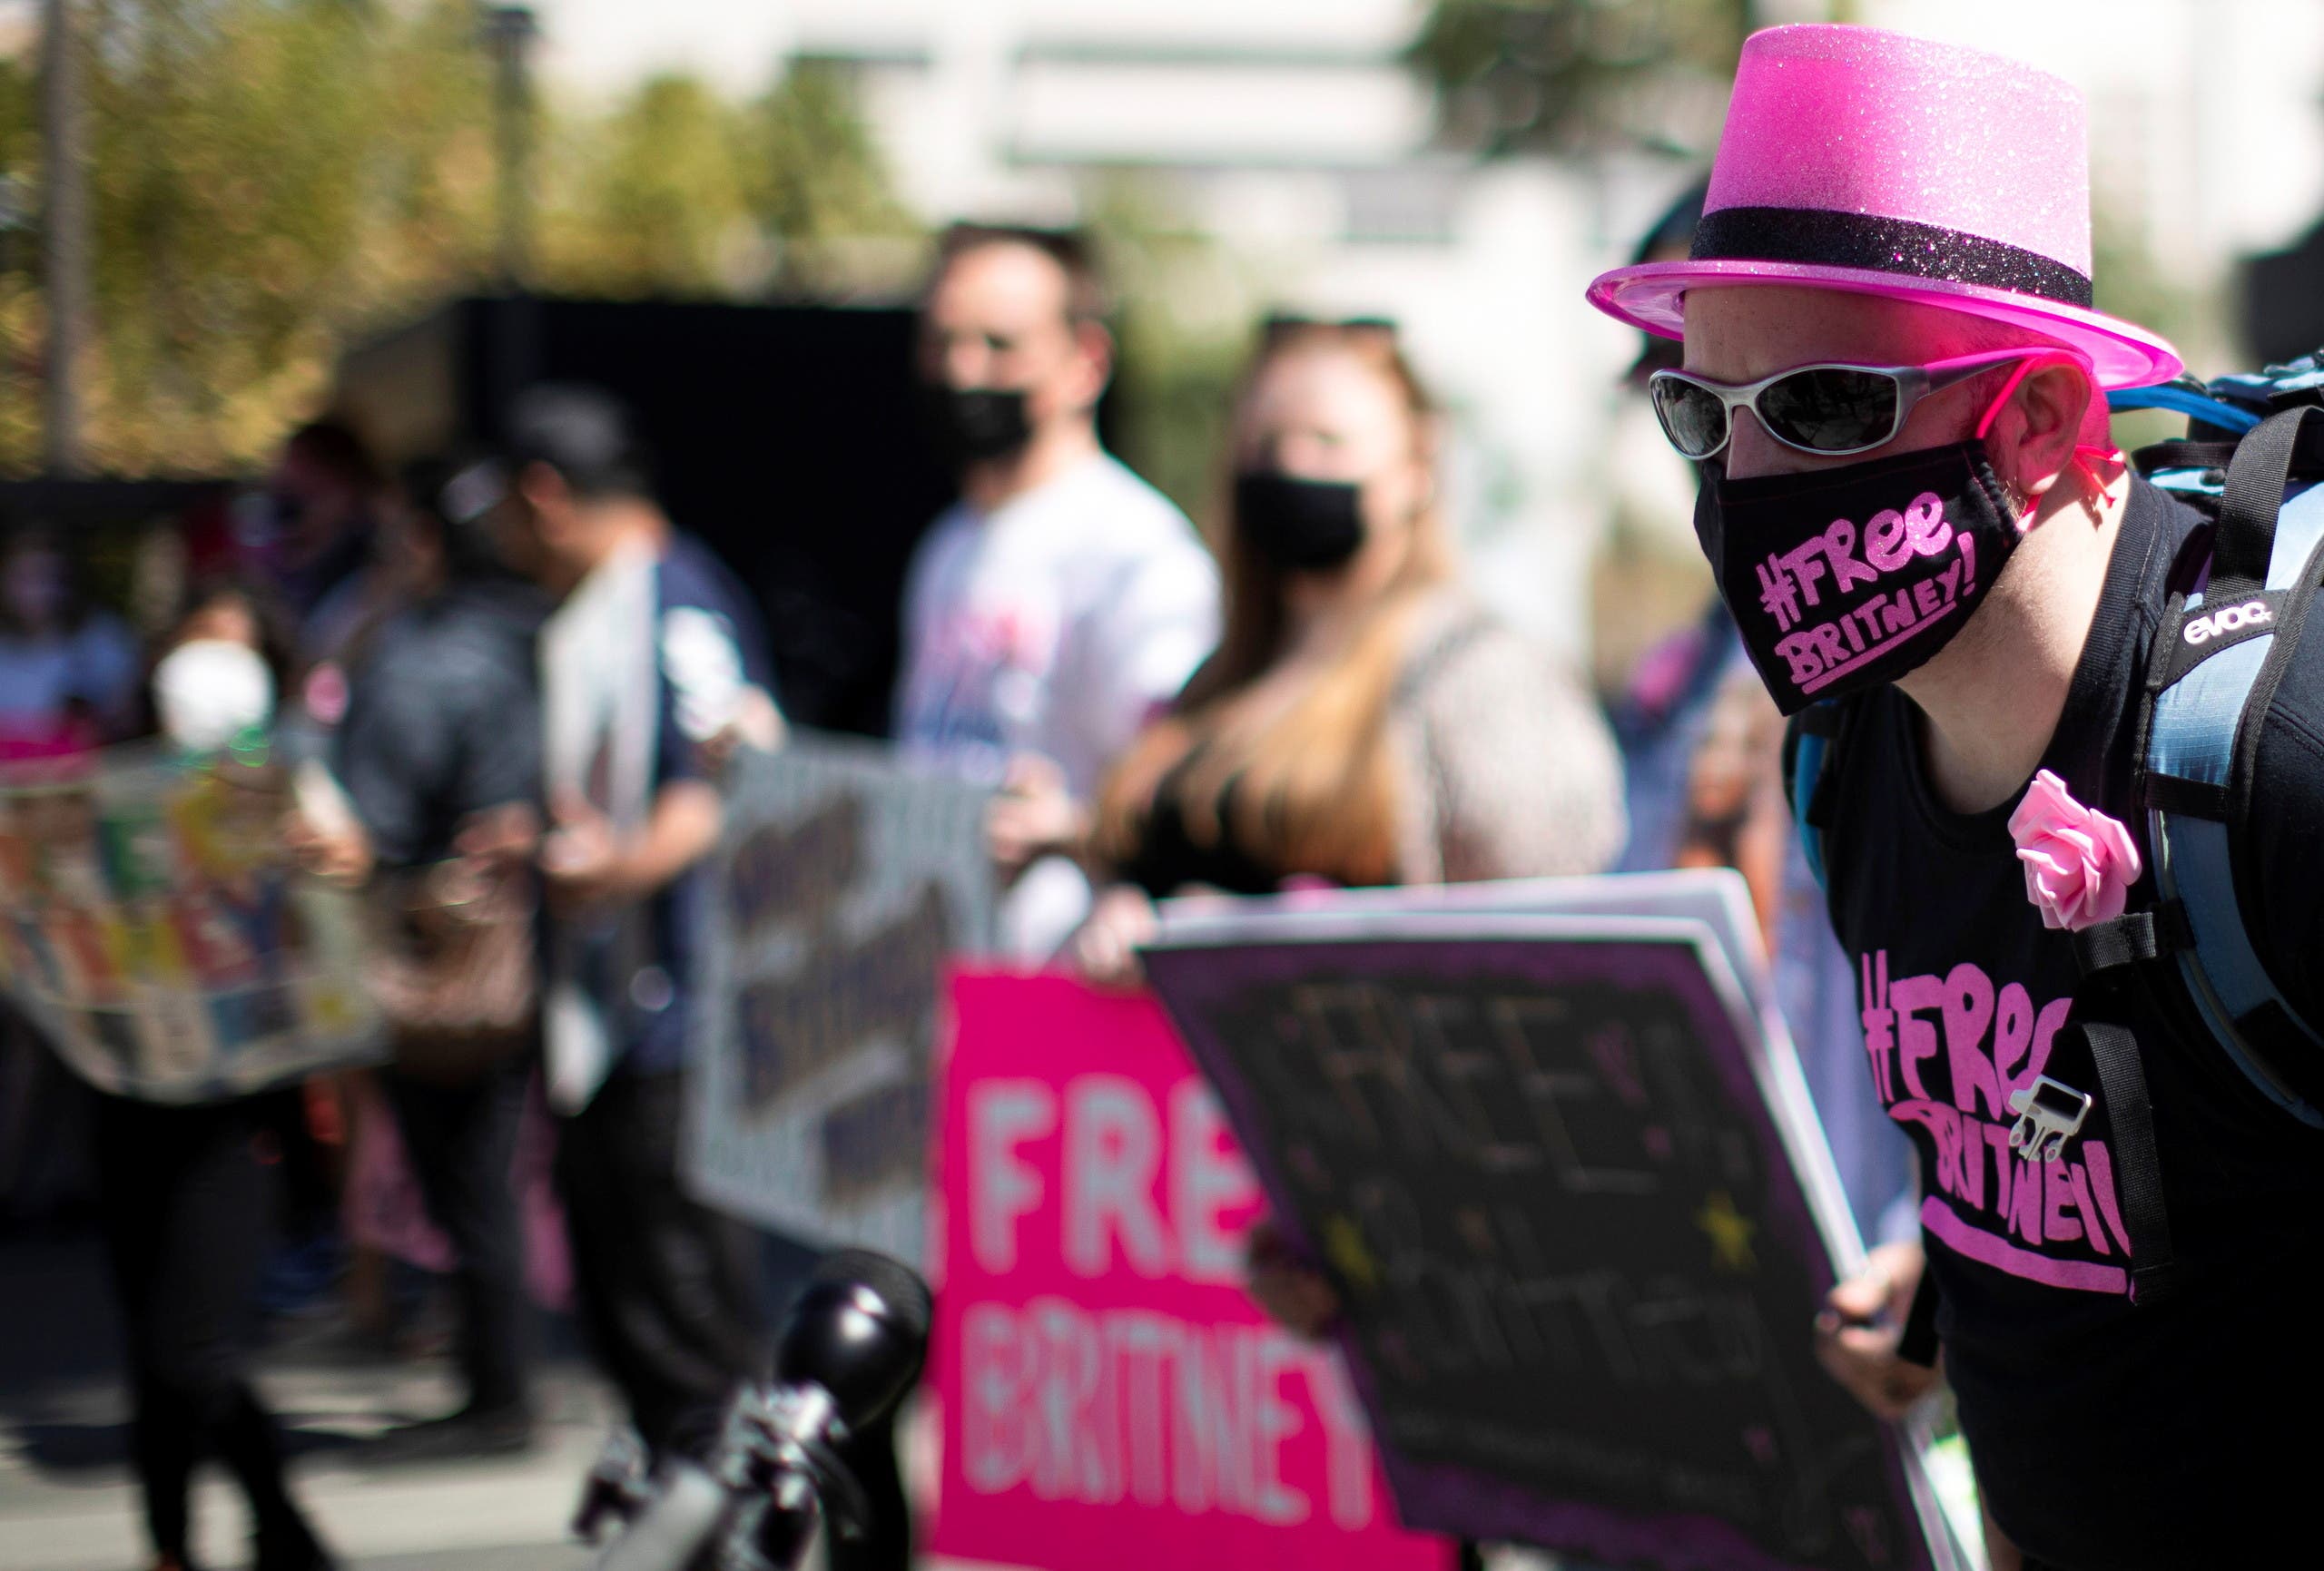 A supporter wearing a personal protective masks rallies for pop star Britney Spears during a conservatorship case hearing at Stanley Mosk Courthouse in Los Angeles, California, US, March 17, 2021. (Reuters)